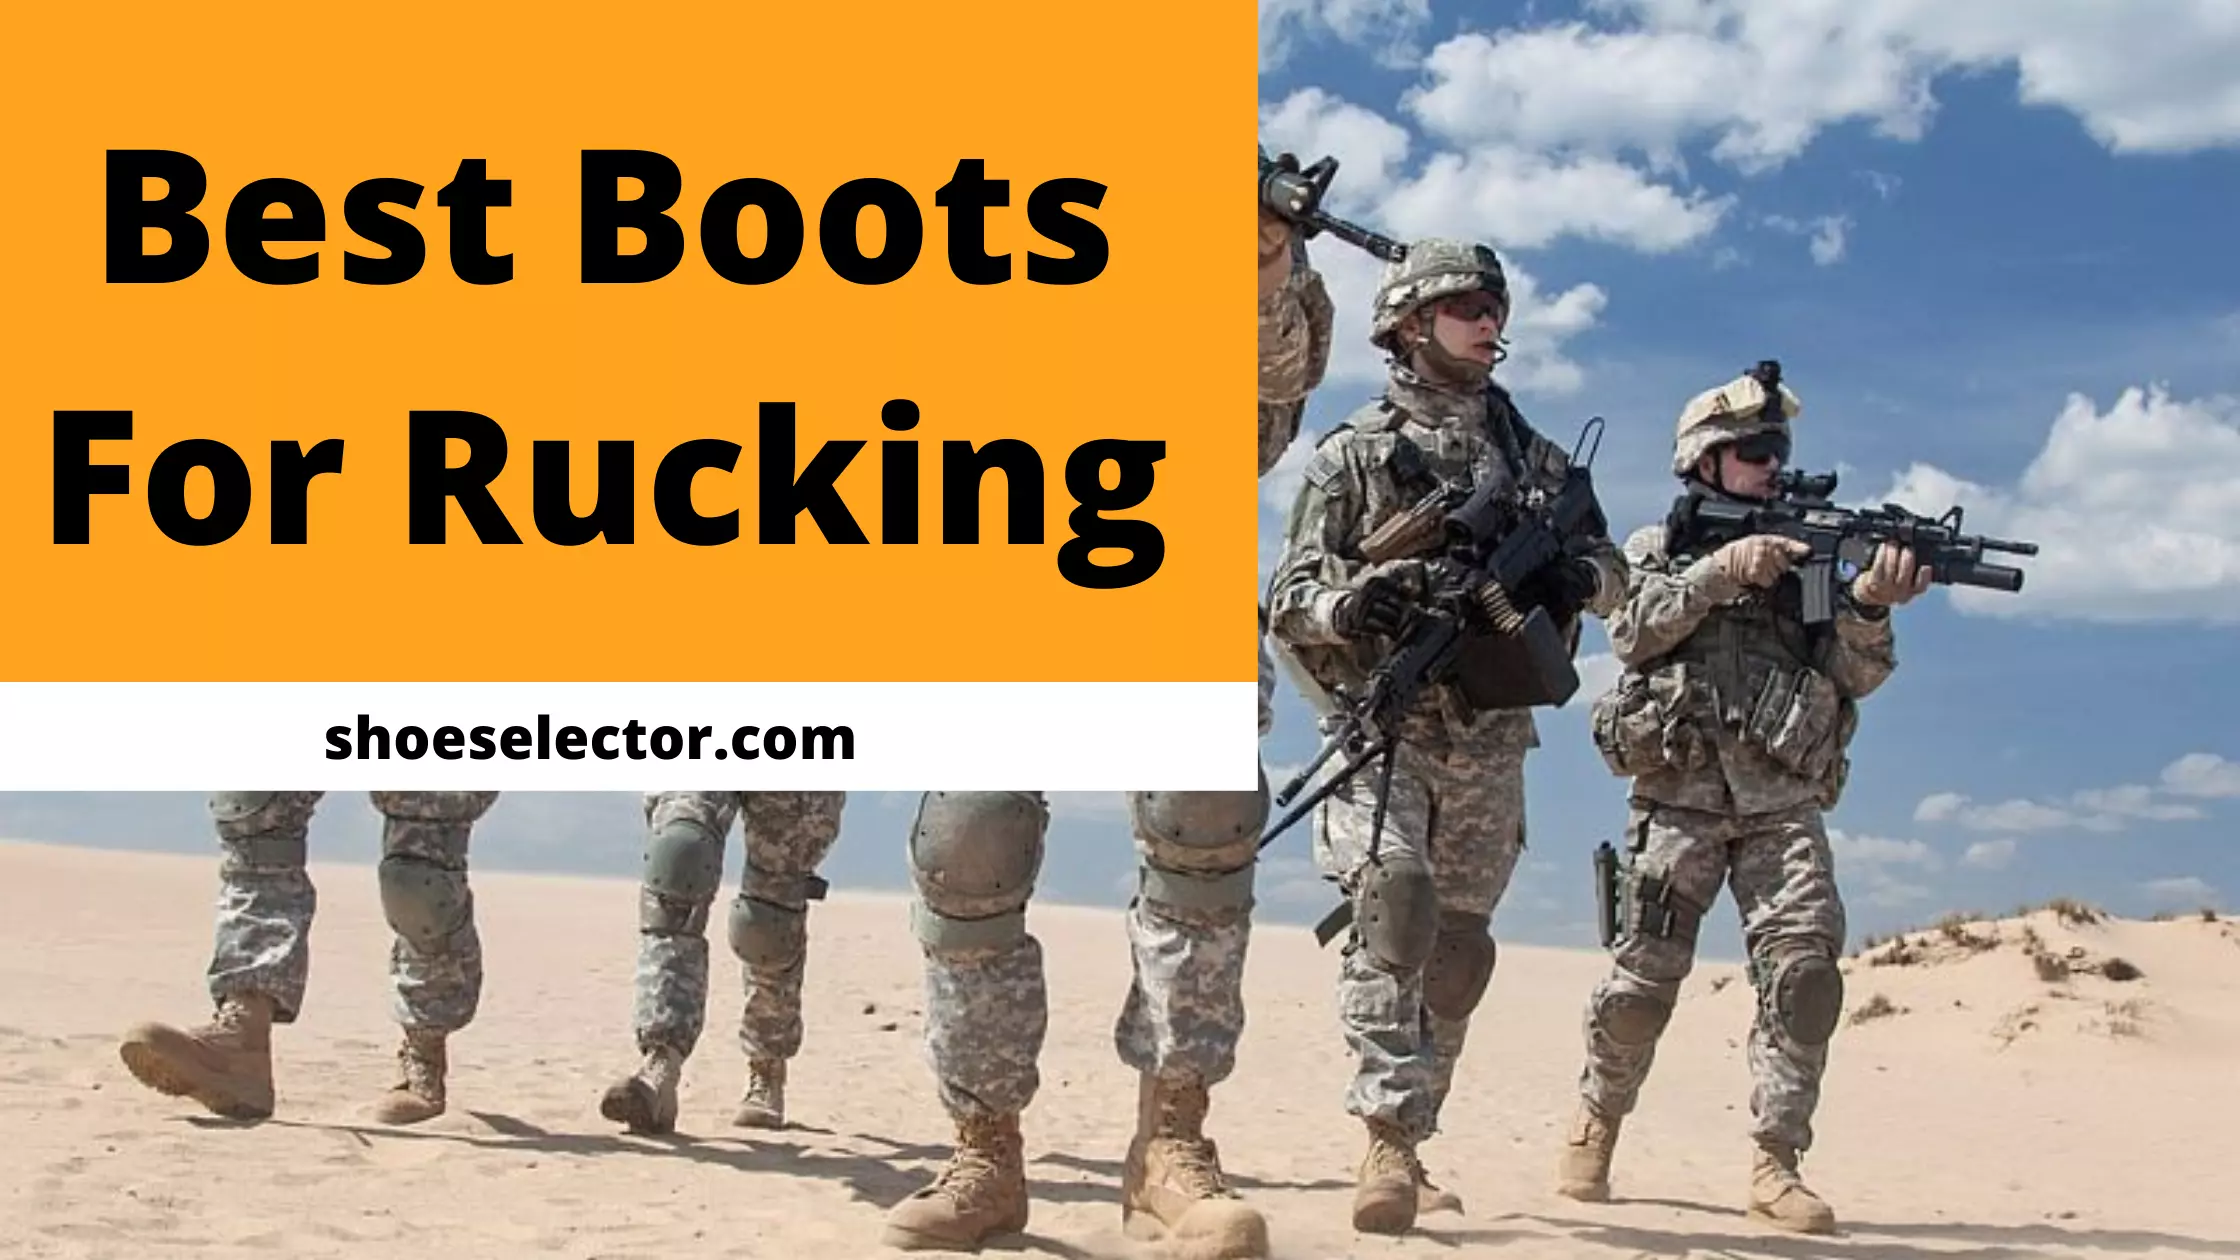 6 Best Boots for Rucking | REVEALED Top Picks in 2022